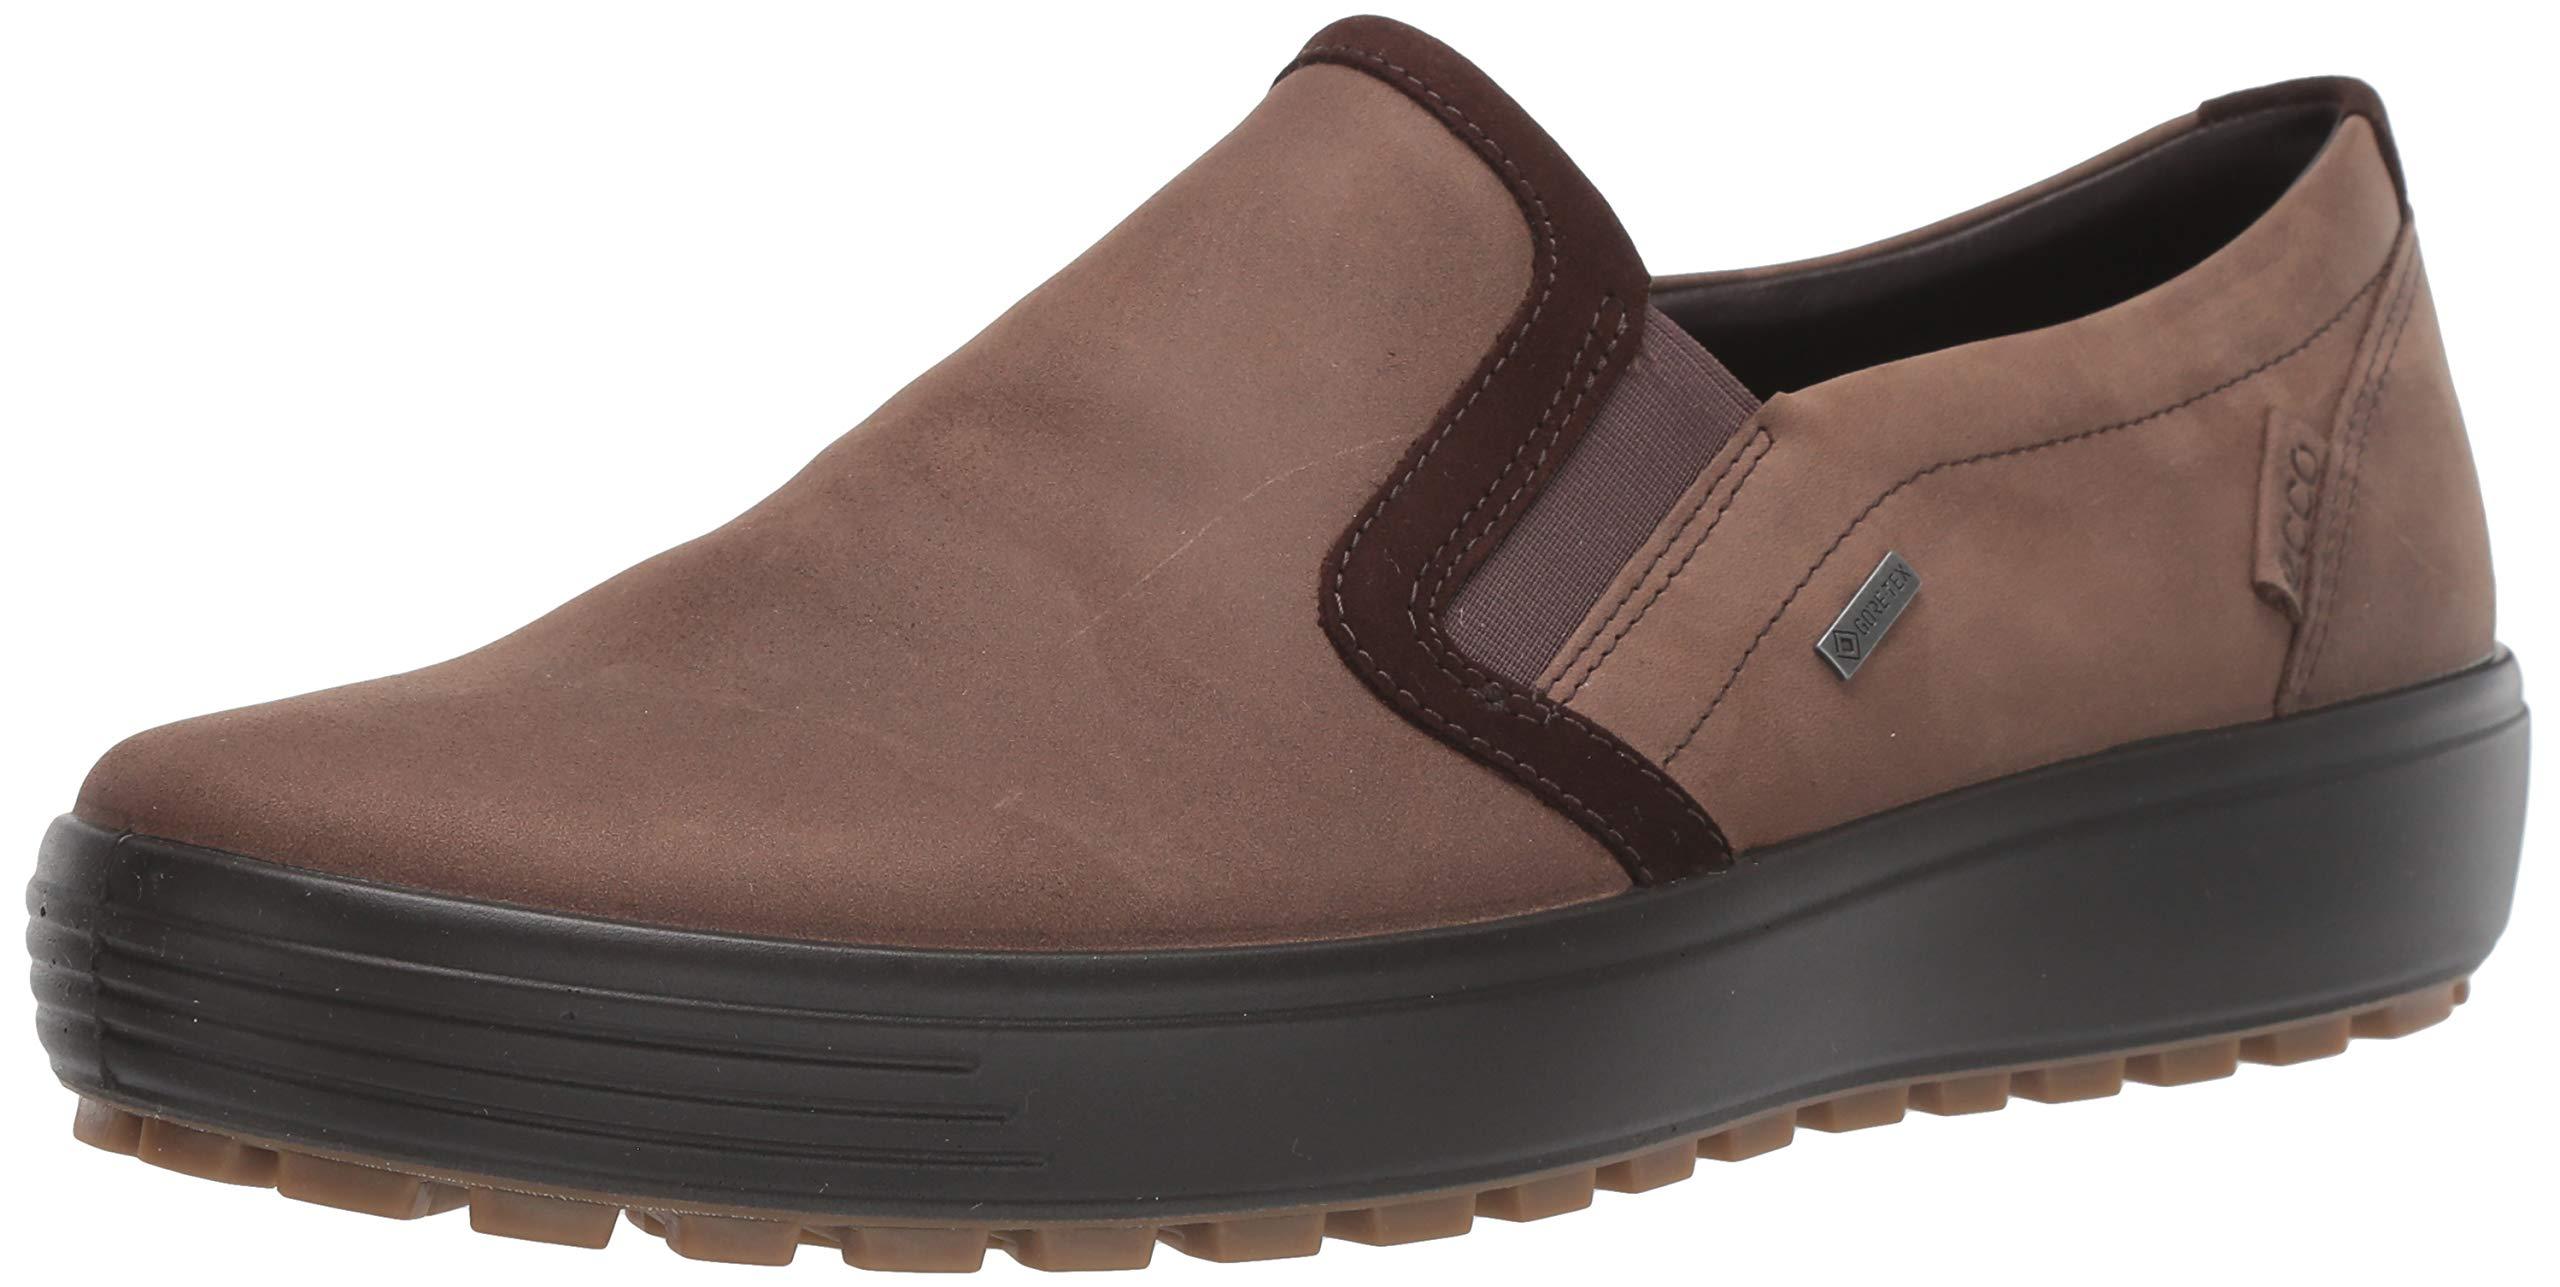 Ecco Suede Soft 7 Tred Gore-tex Slip On Sneaker in Brown for Men - Save ...